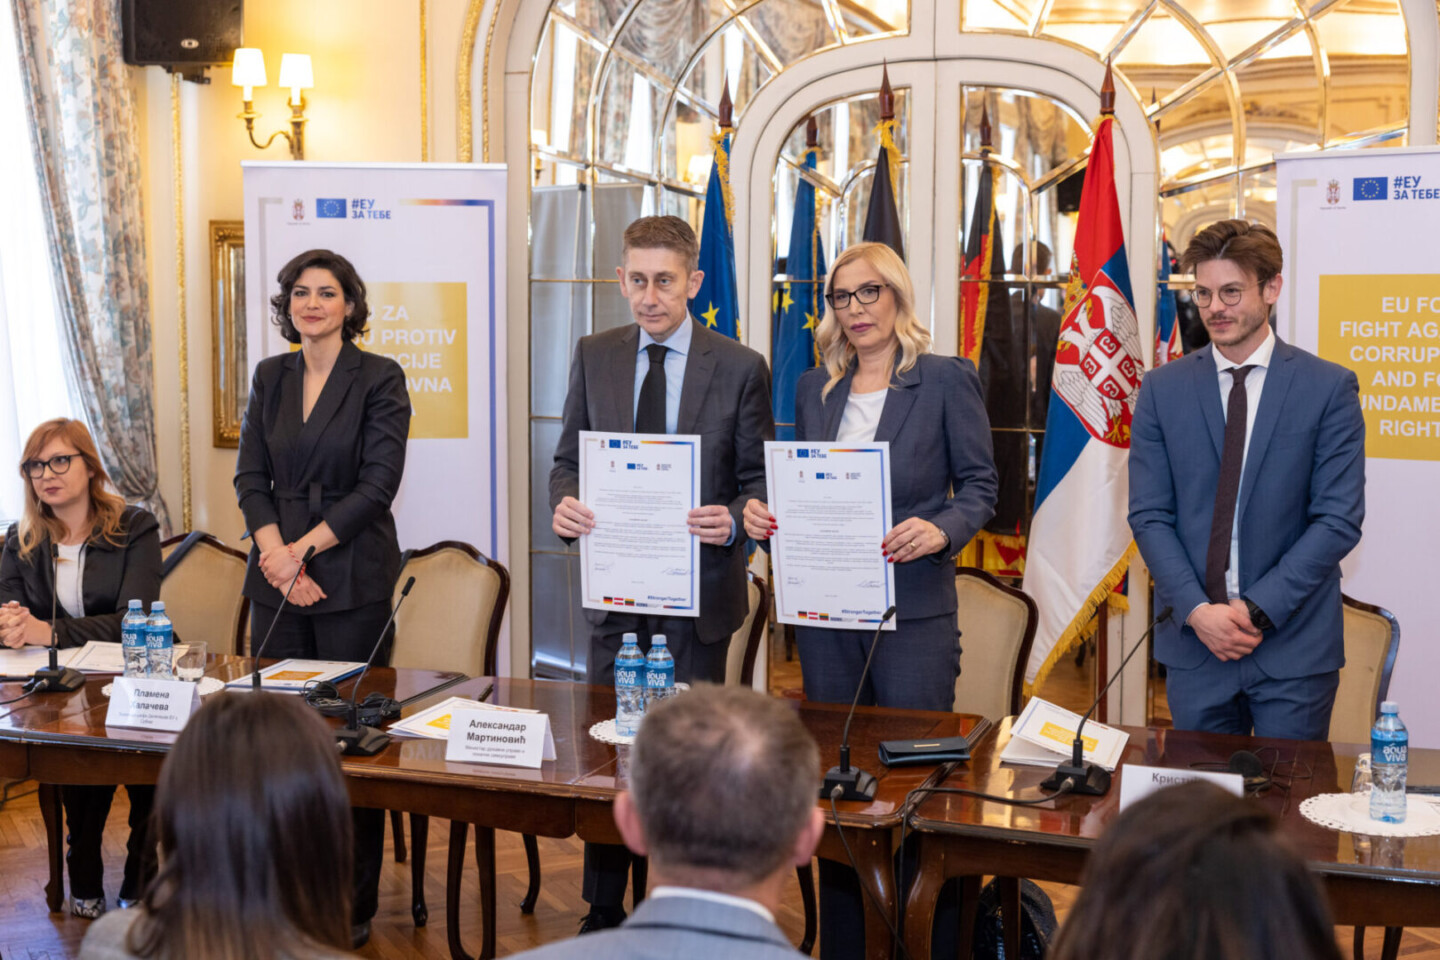 Signing of the Joint Statement between the Ministry of Justice and the Ministry of State Administration and Local Self-Government for improving the implementation of the Law on Free Legal Aid